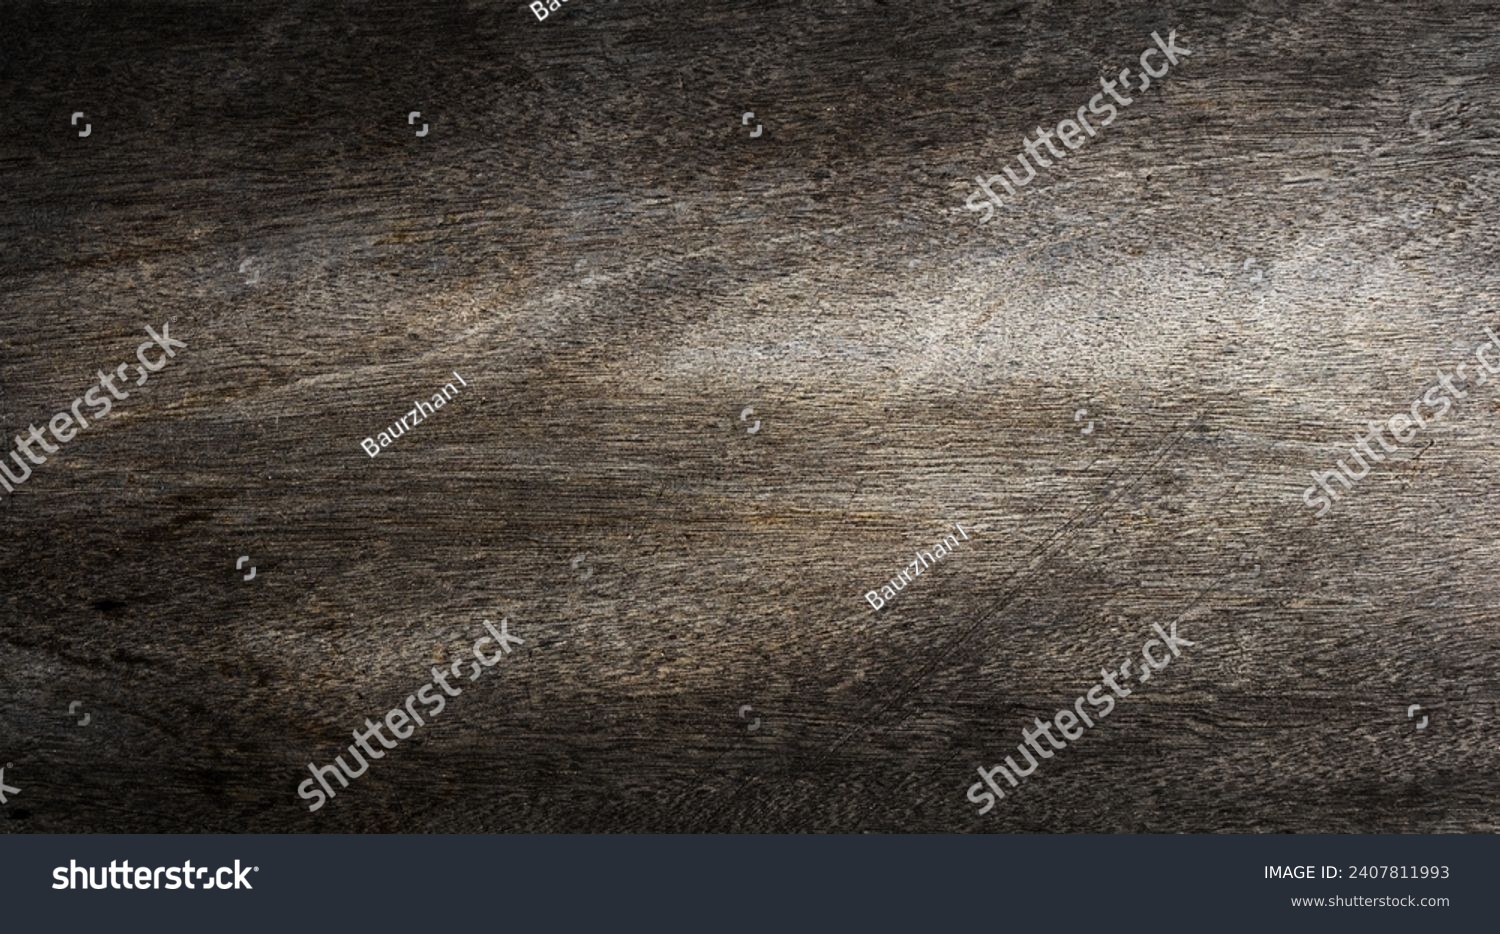 Wide old shabby wood texture. Wooden desk table or floor. #2407811993